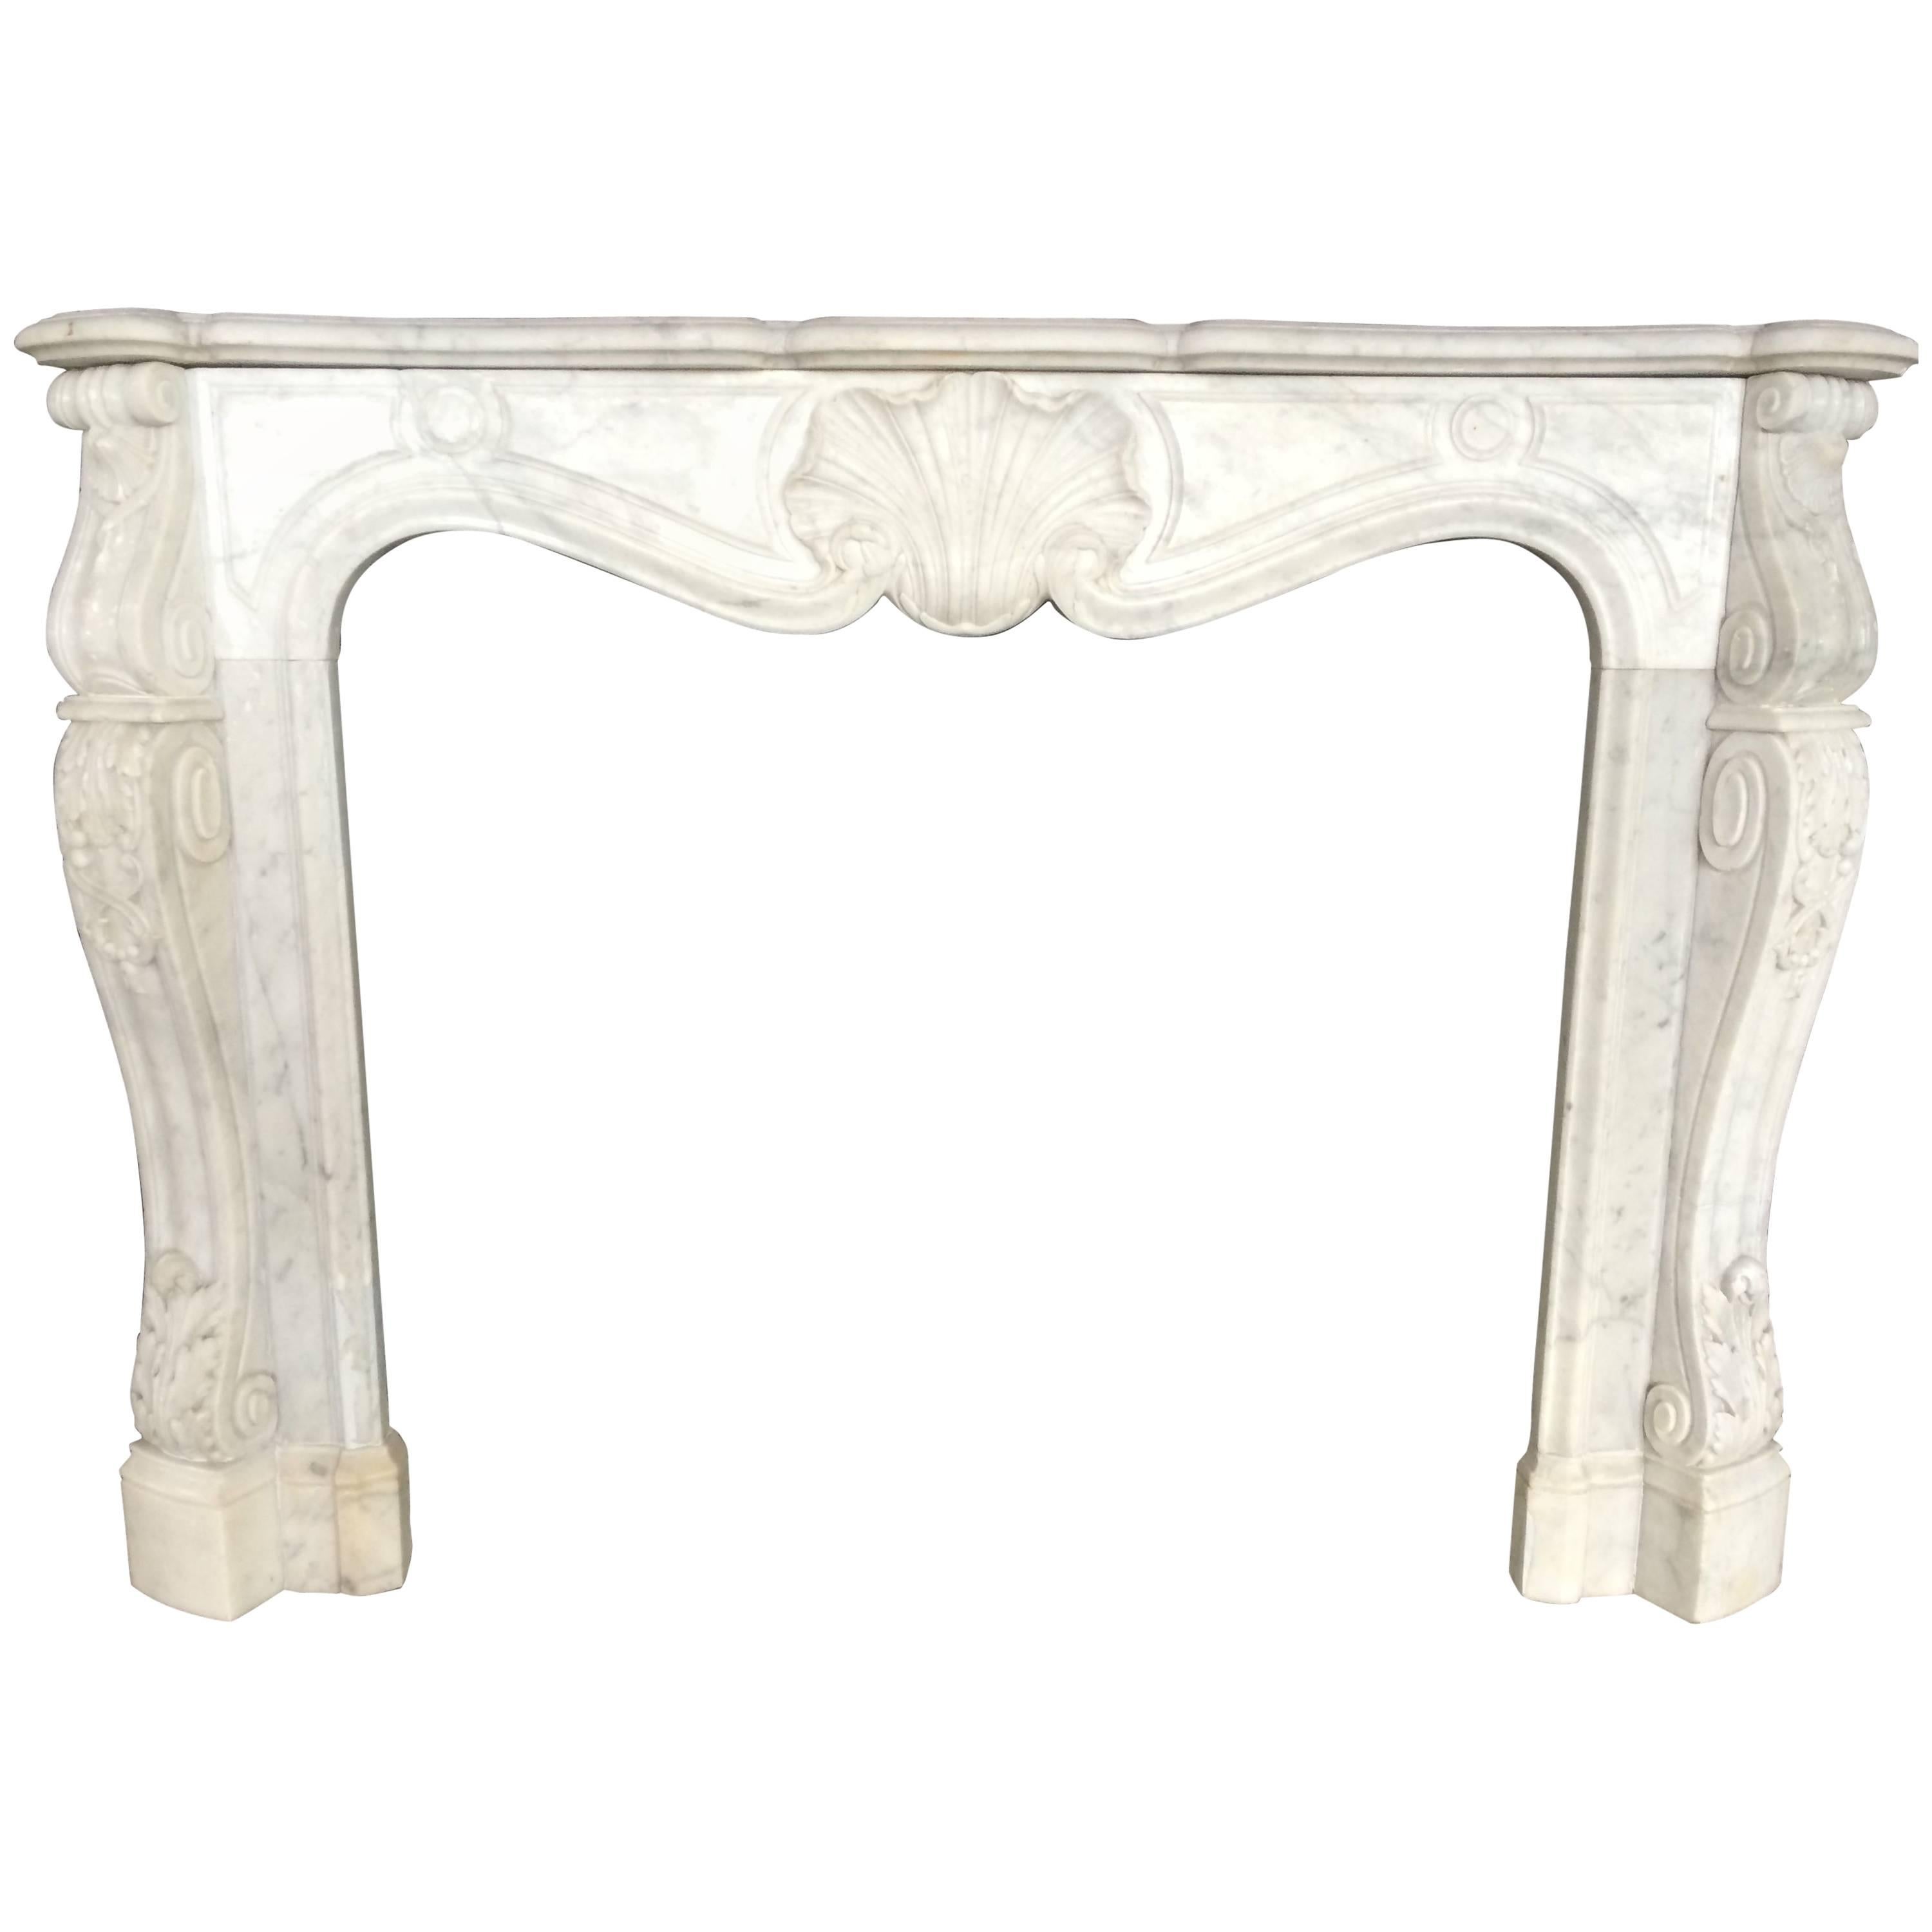 Antique Marble Fireplace White Carrera Exceptional Quality France, 19th C For Sale